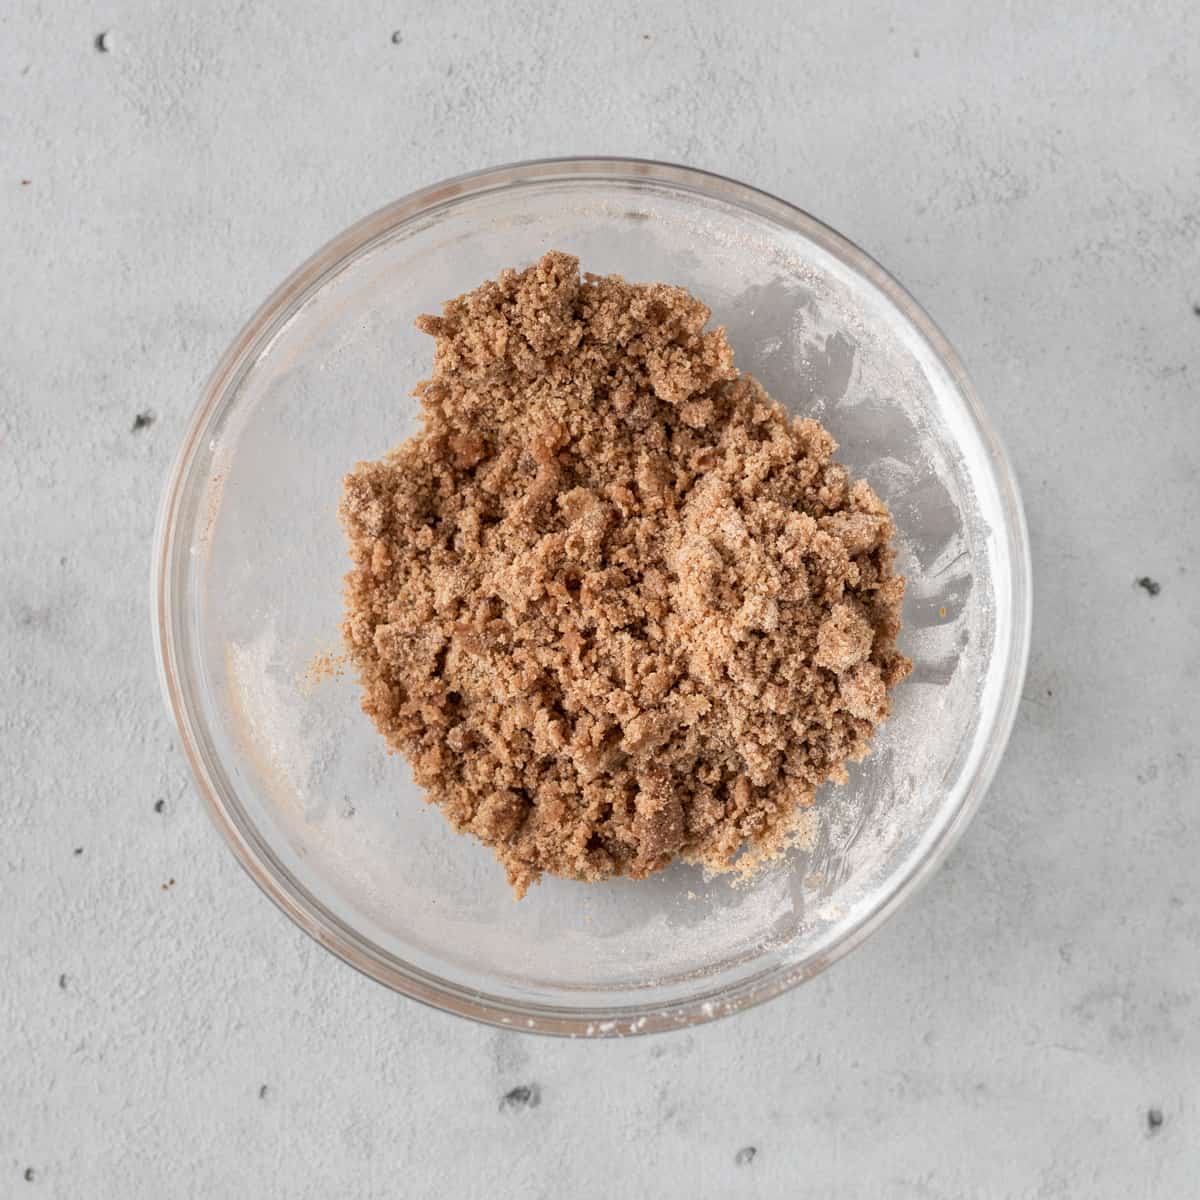 the cinnamon crumble mixture in a glass bowl on a grey background.